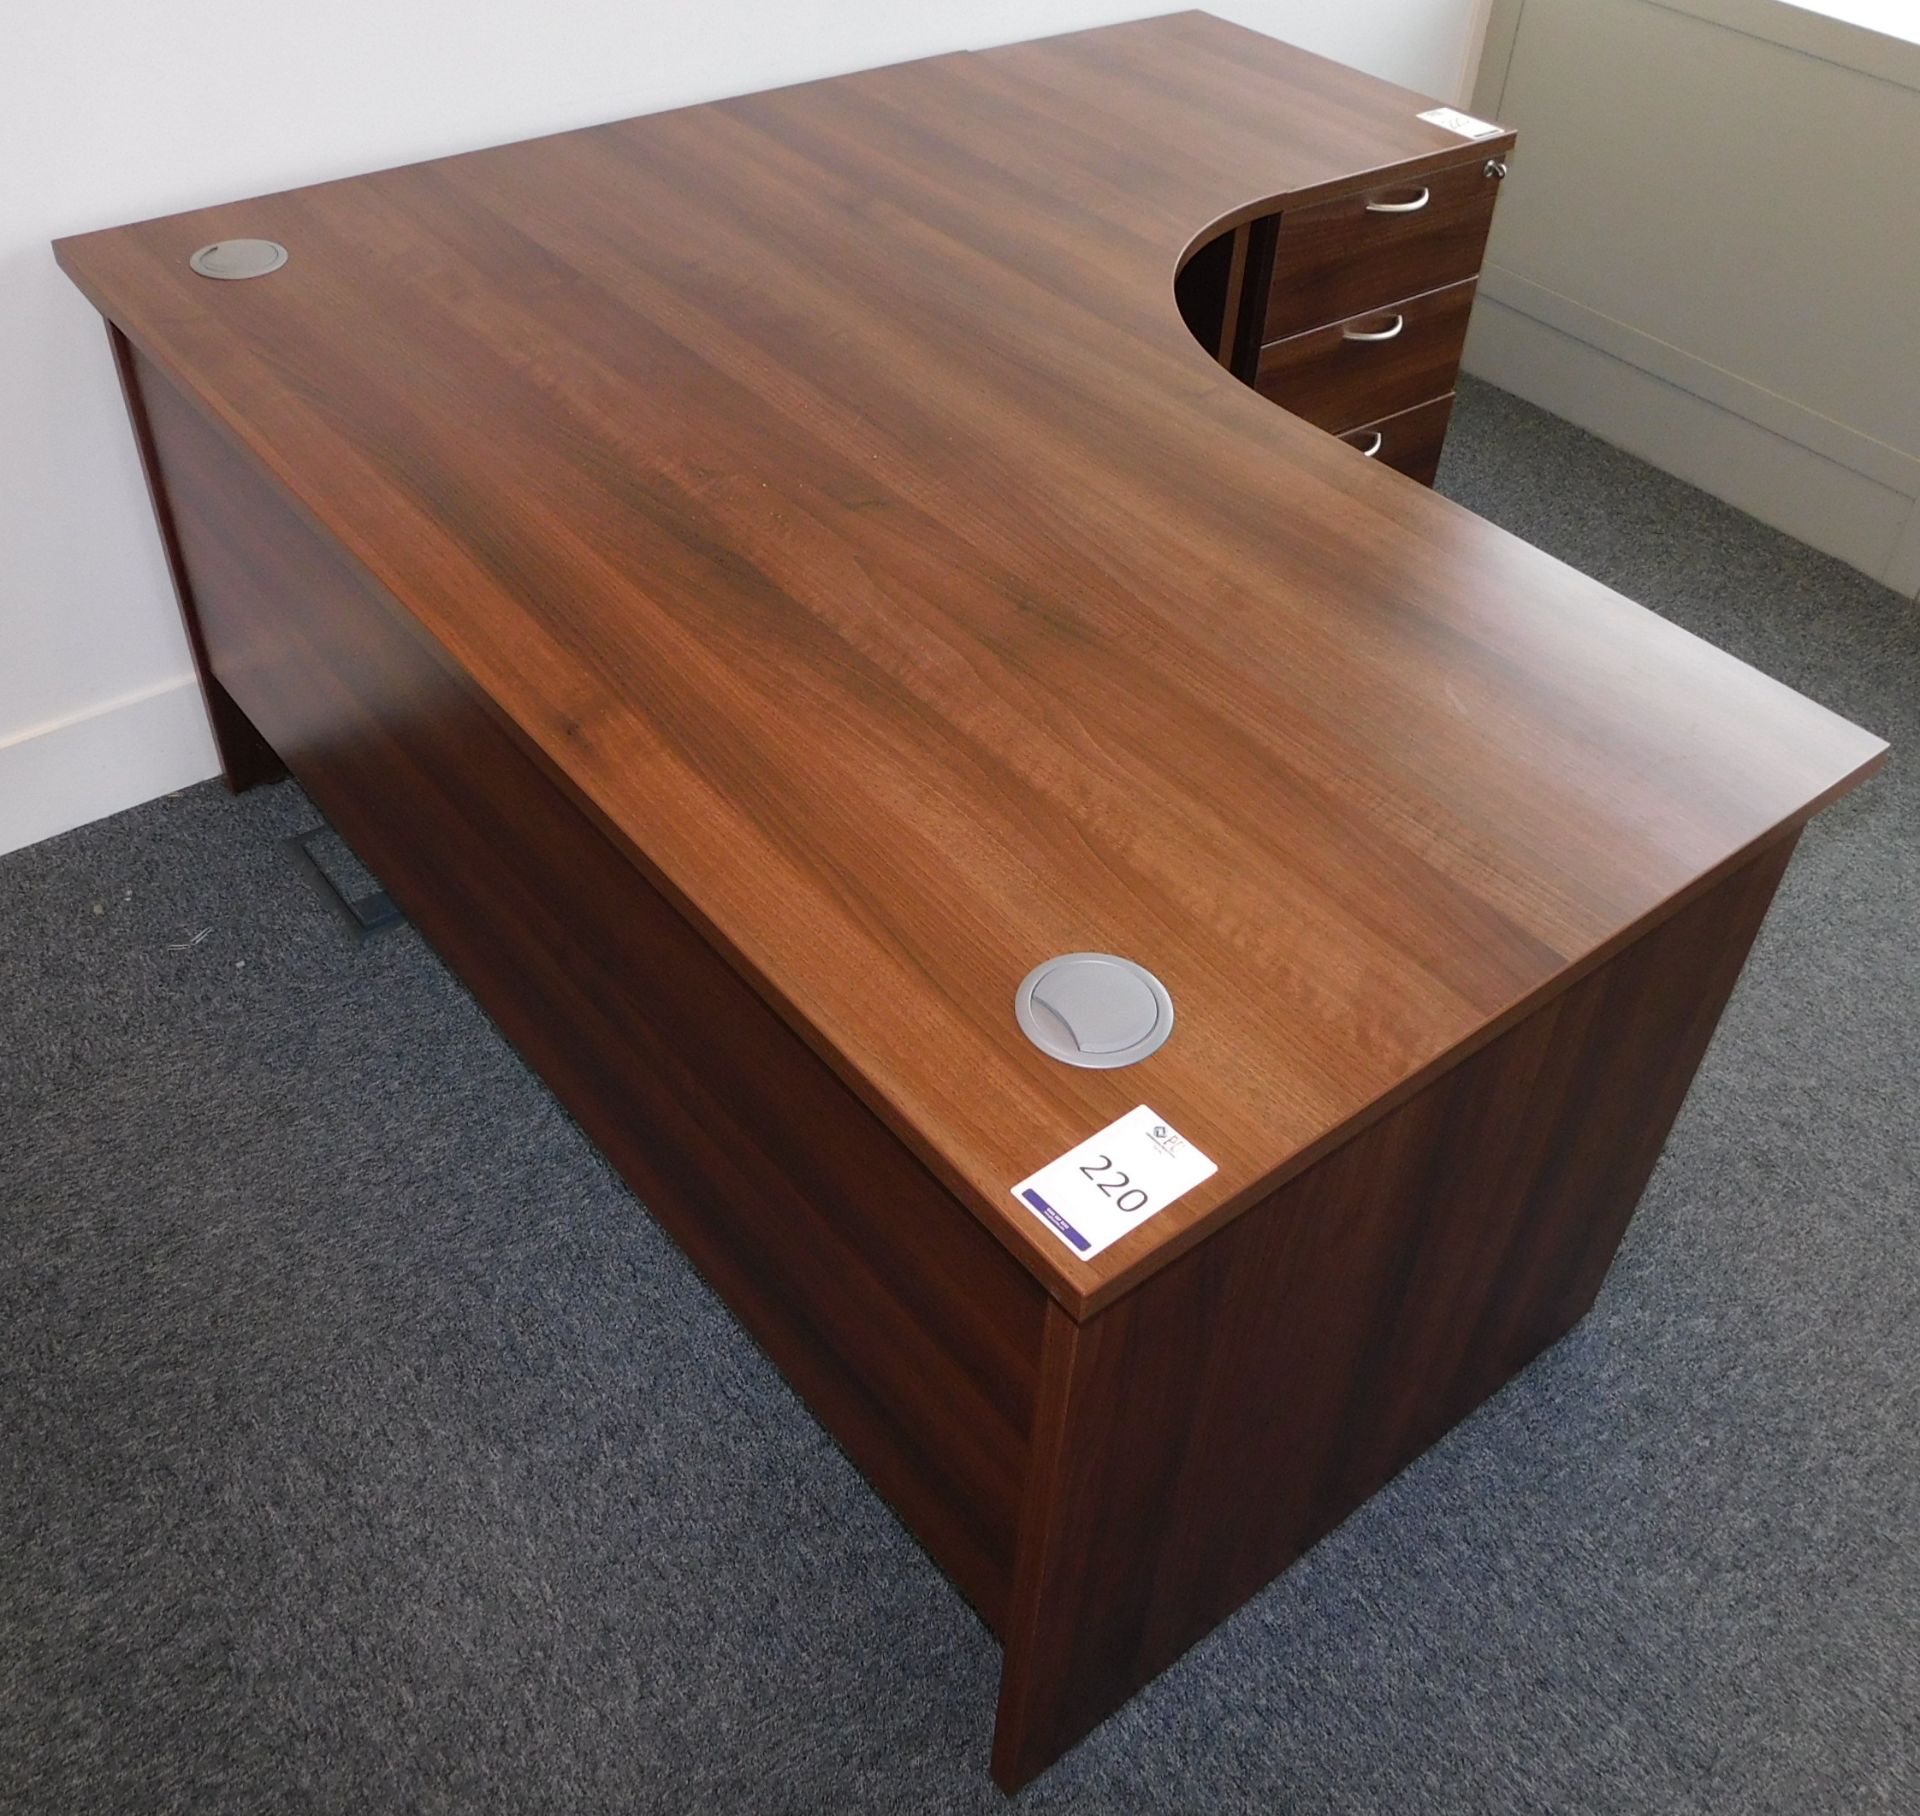 American Walnut Effect Shaped Workstation 160cm x 120cm with Matching 3-Drawer Pedestal (Located